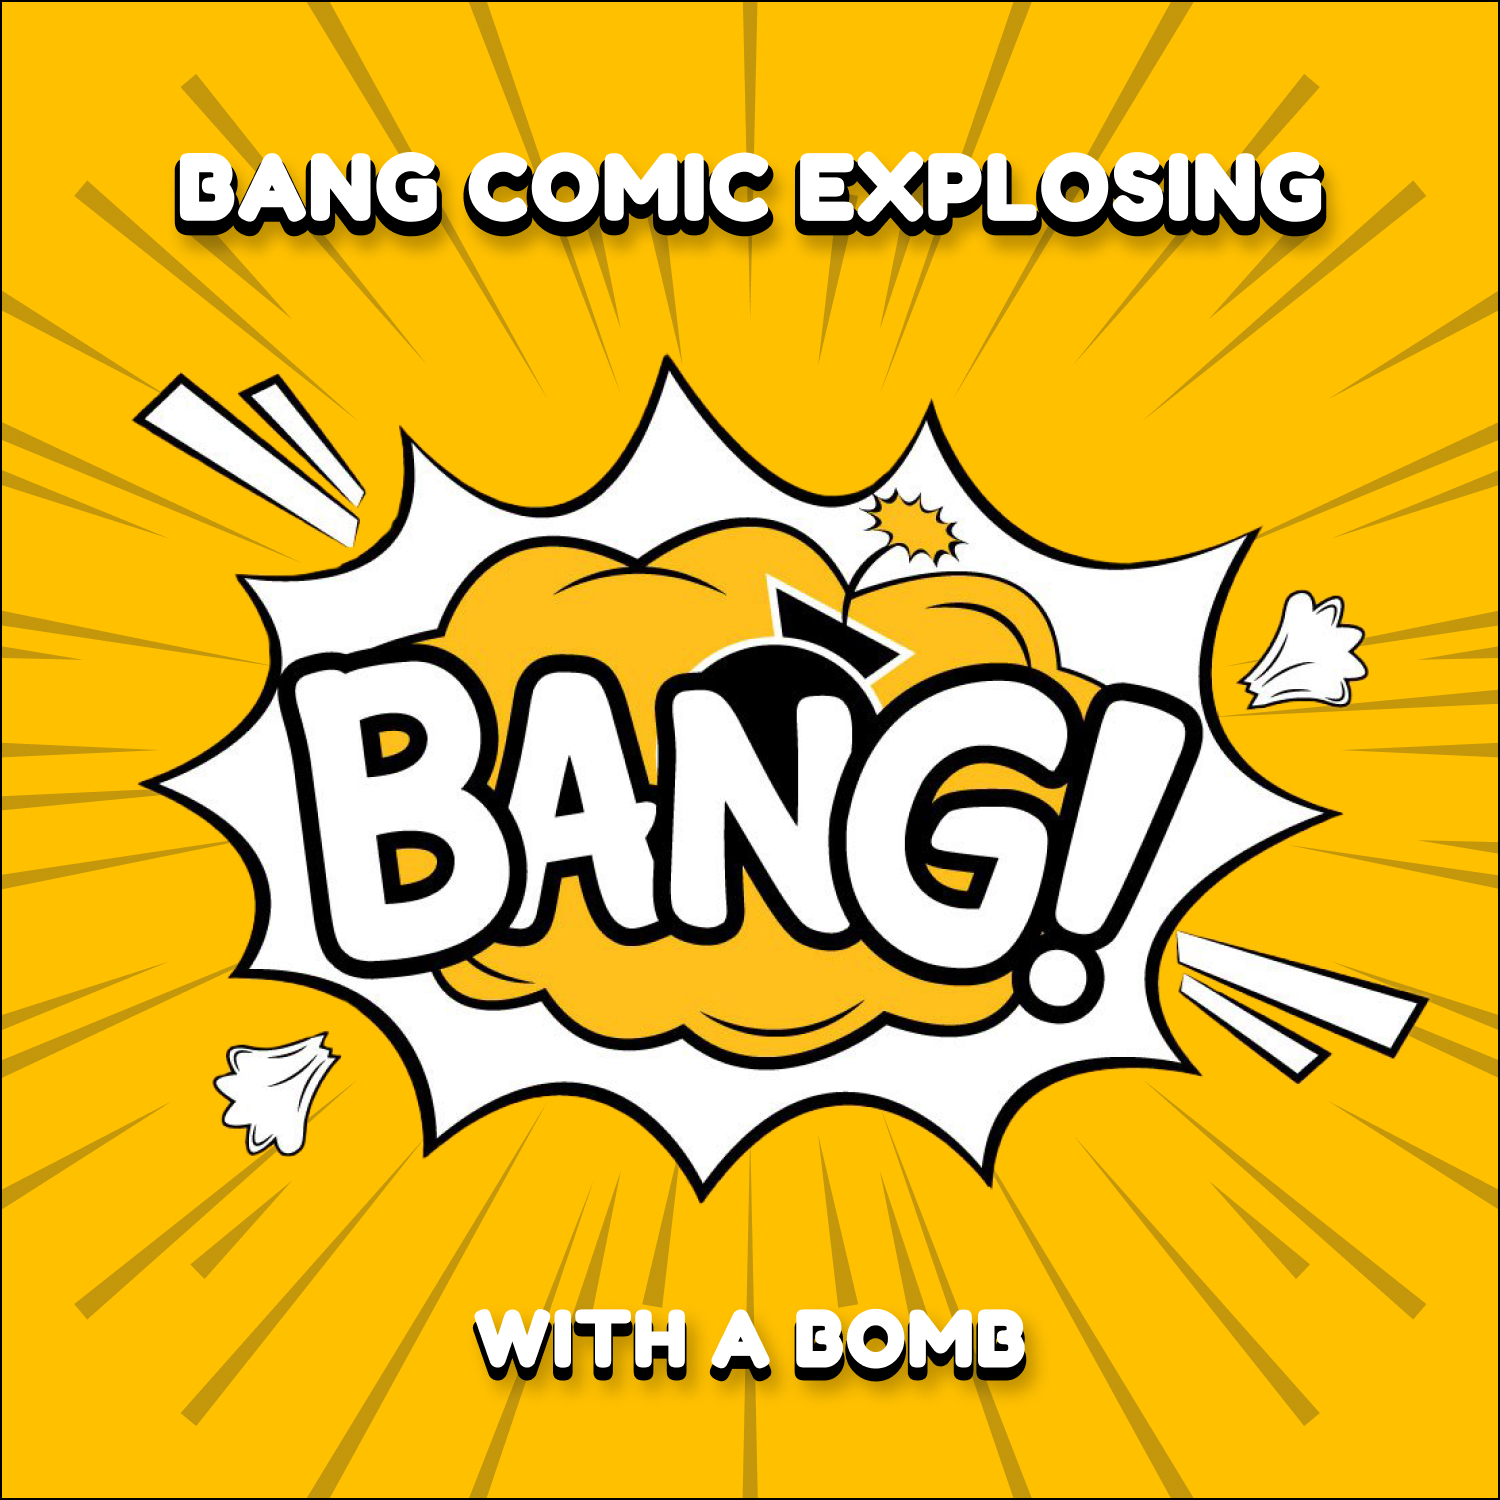 Bang Comic Explosion with a Bomb.